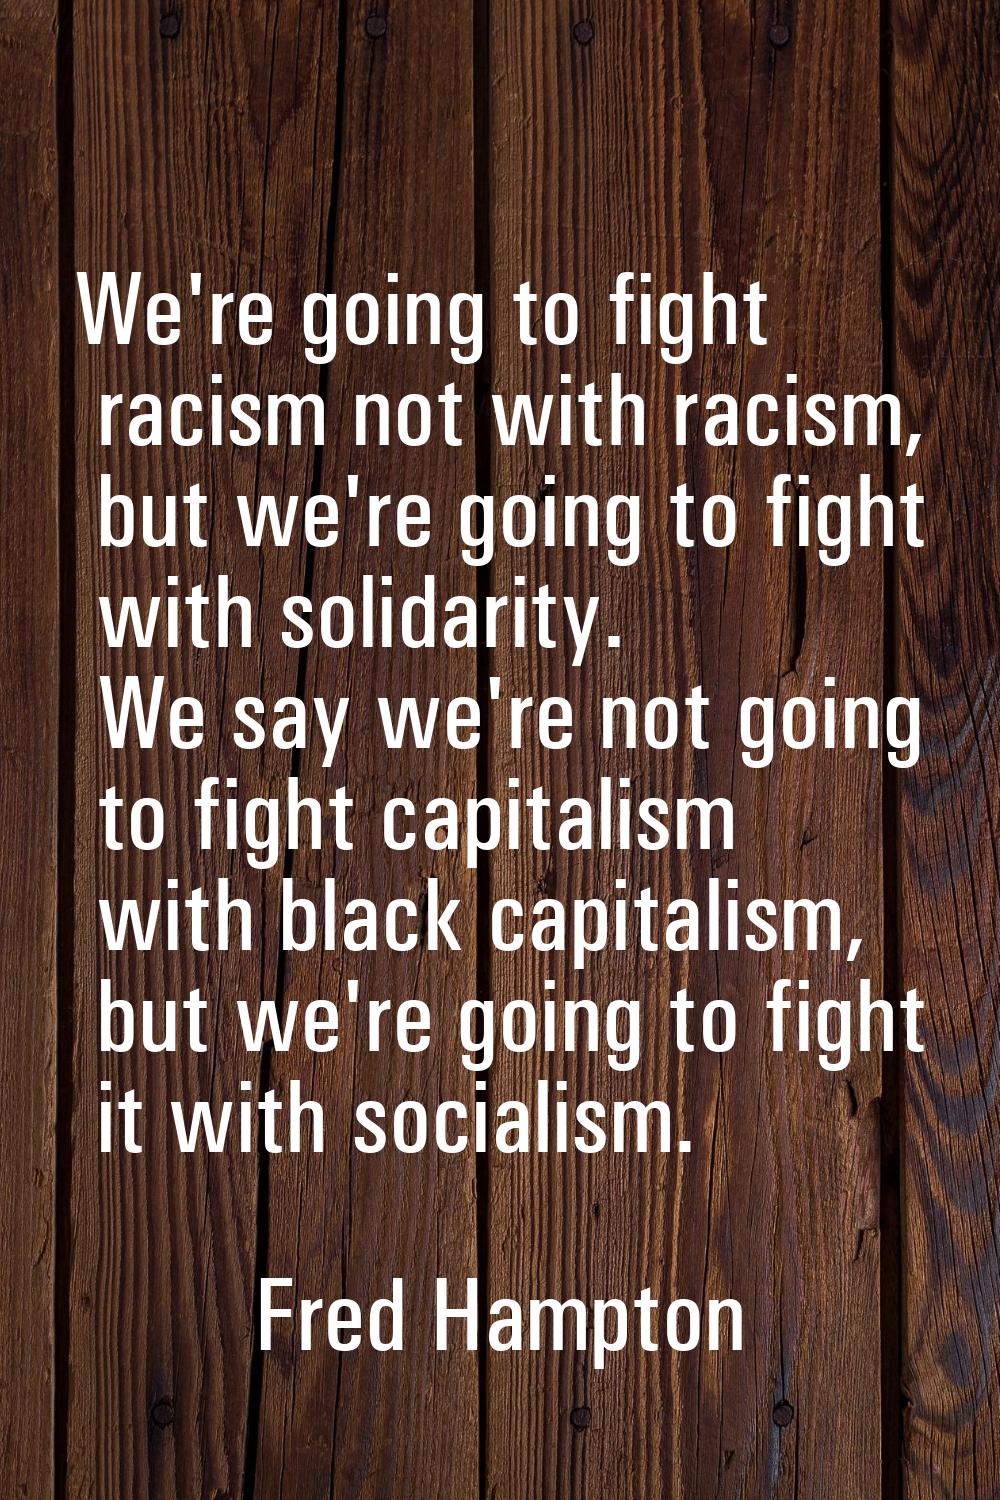 We're going to fight racism not with racism, but we're going to fight with solidarity. We say we're